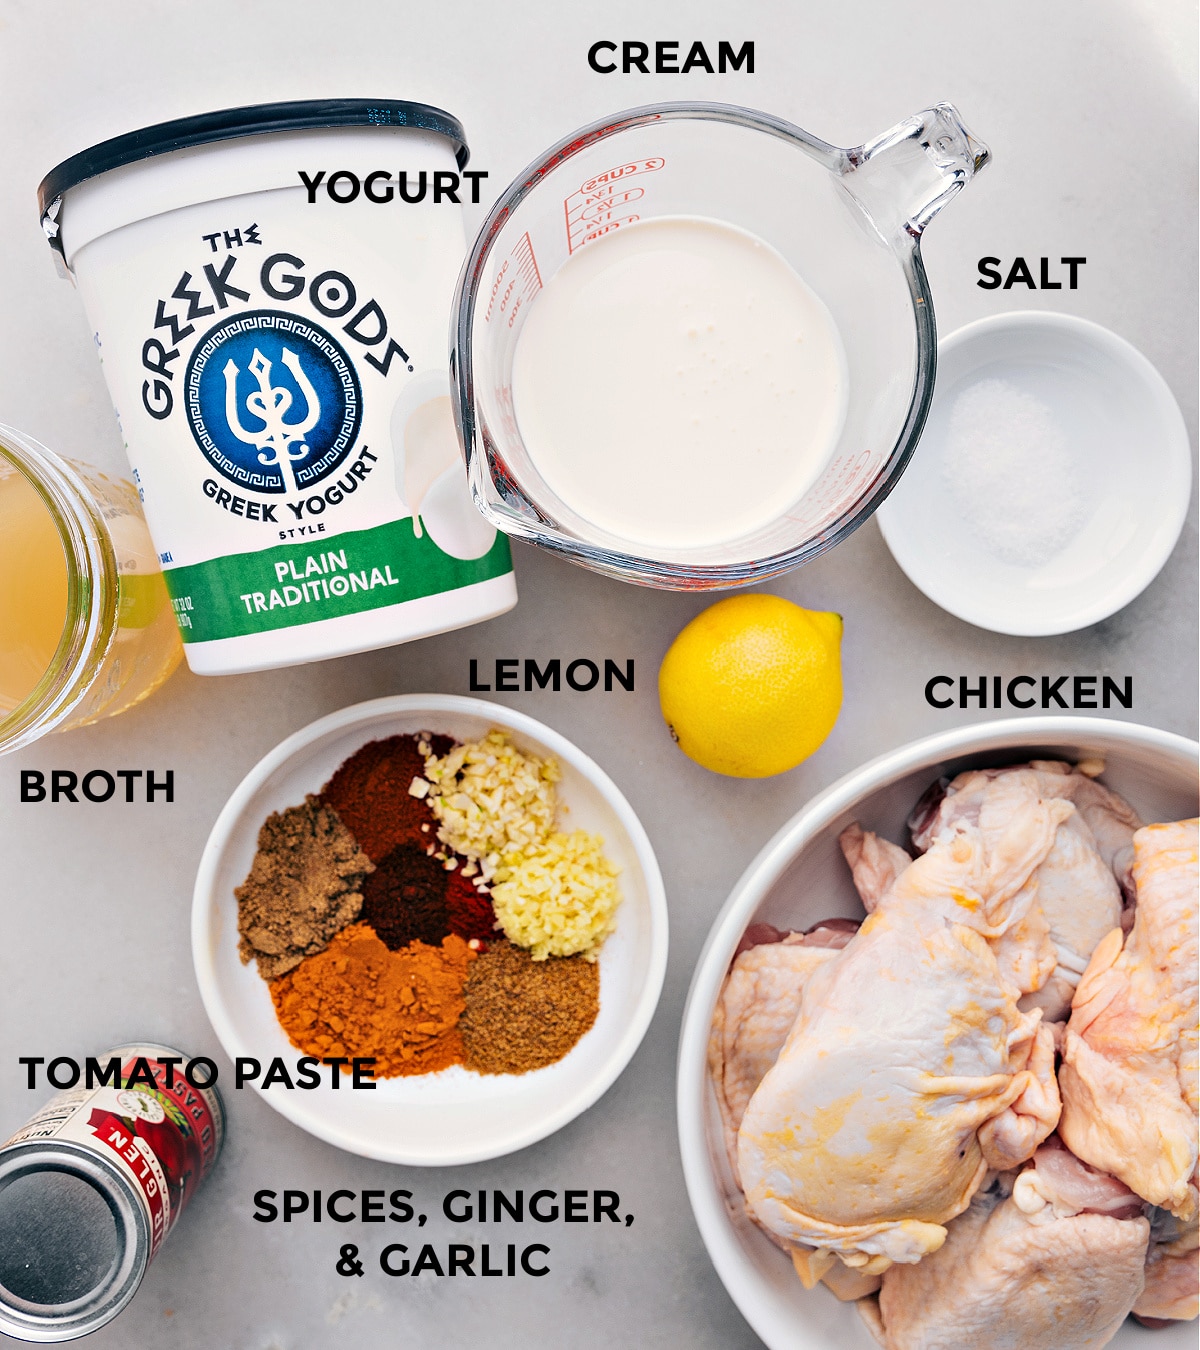 Ingredients used for the recipe including chicken, spices, yogurt, cream, and more.